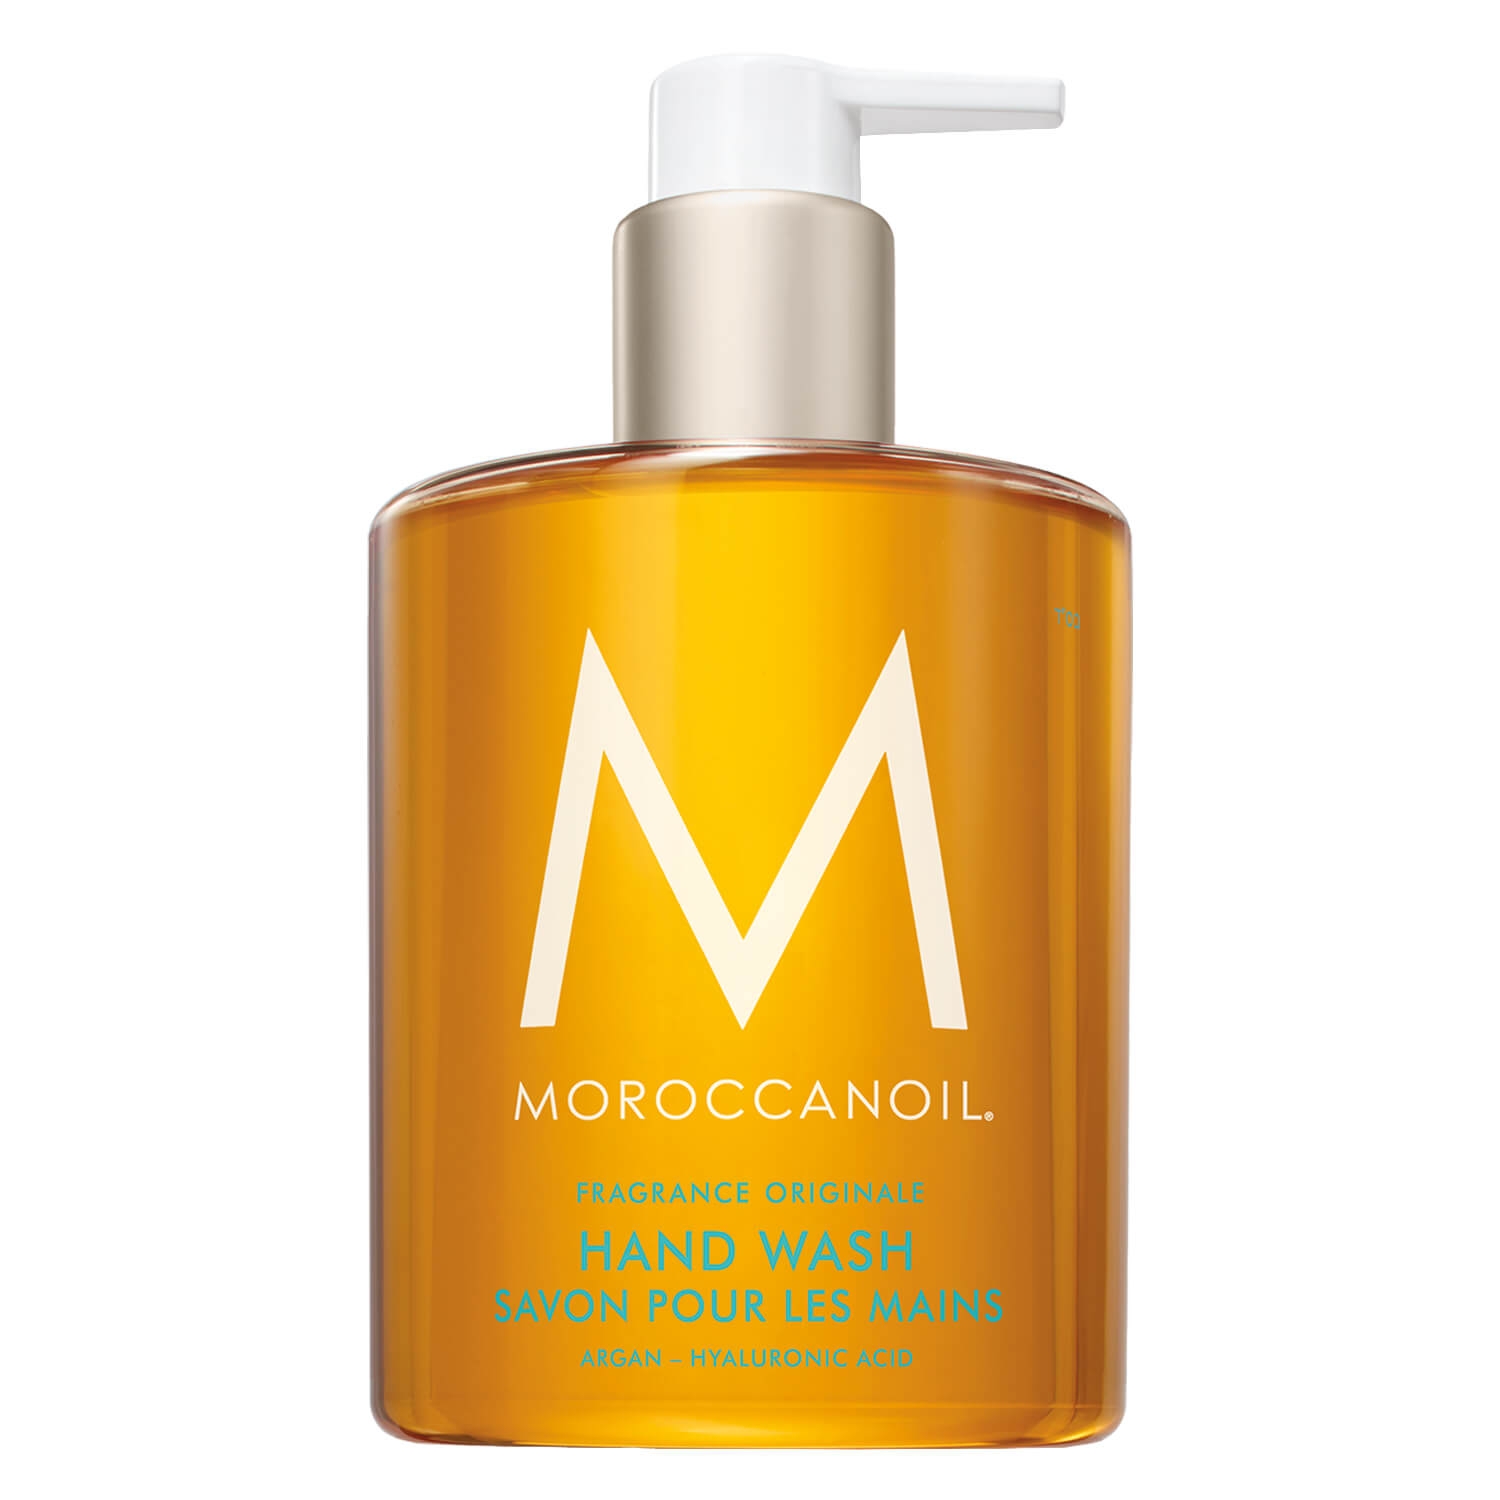 Product image from Moroccanoil Hand Wash Fragrance Originale